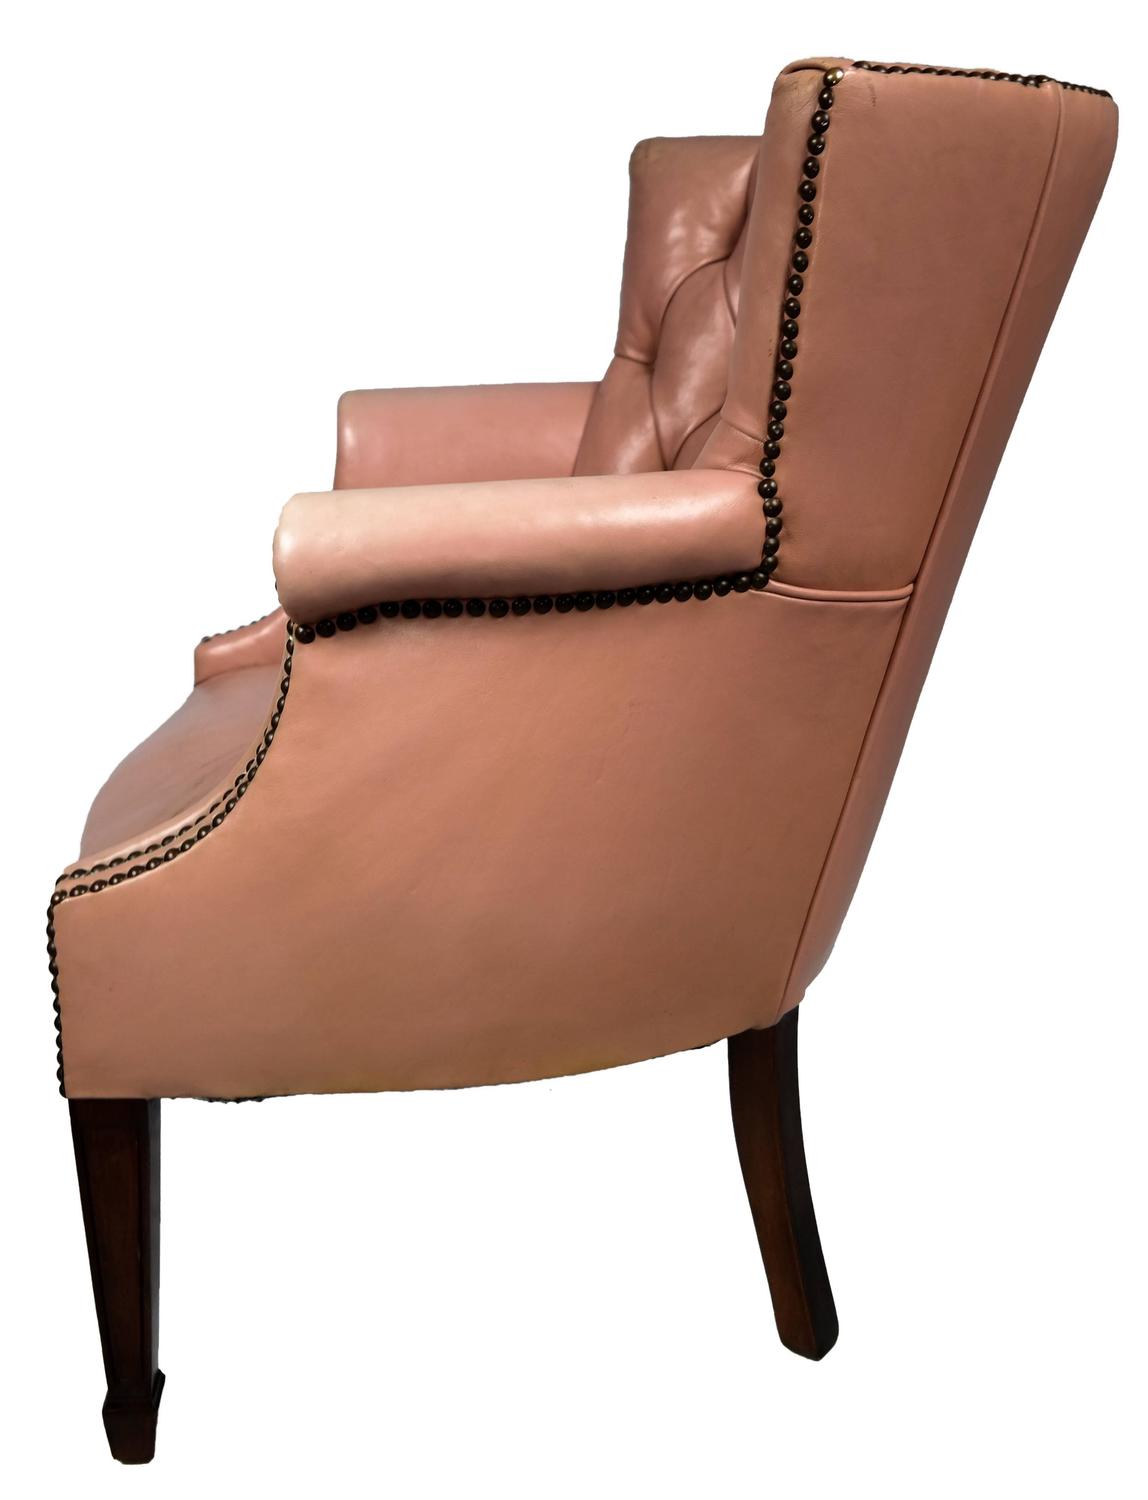 Midcentury Tufted Leather Armchair For Sale at 1stdibs